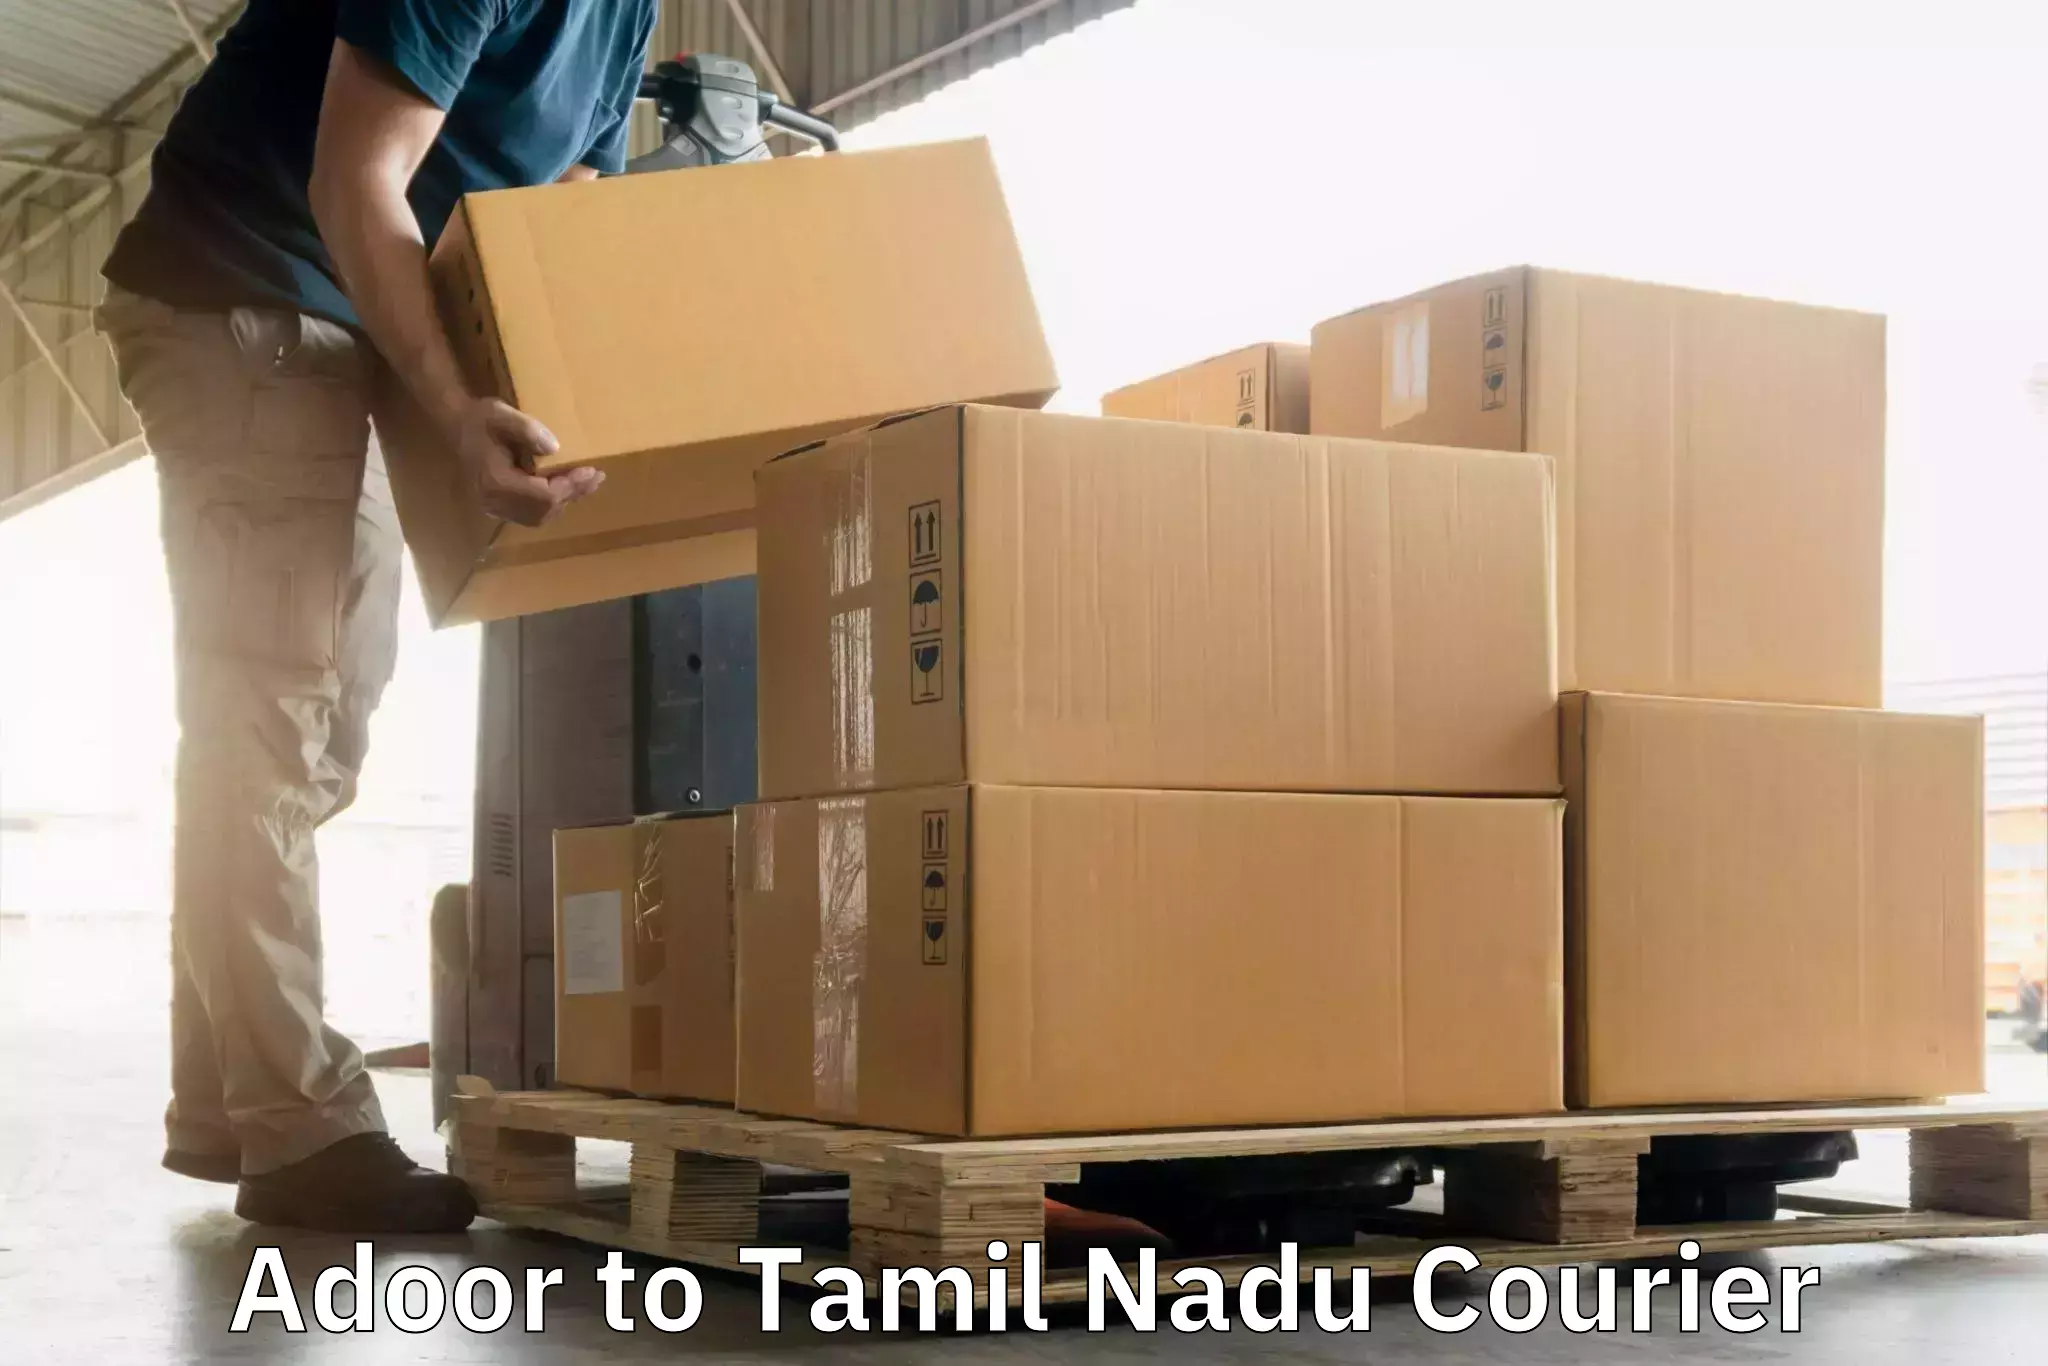 Automated parcel services Adoor to Thiruvarur